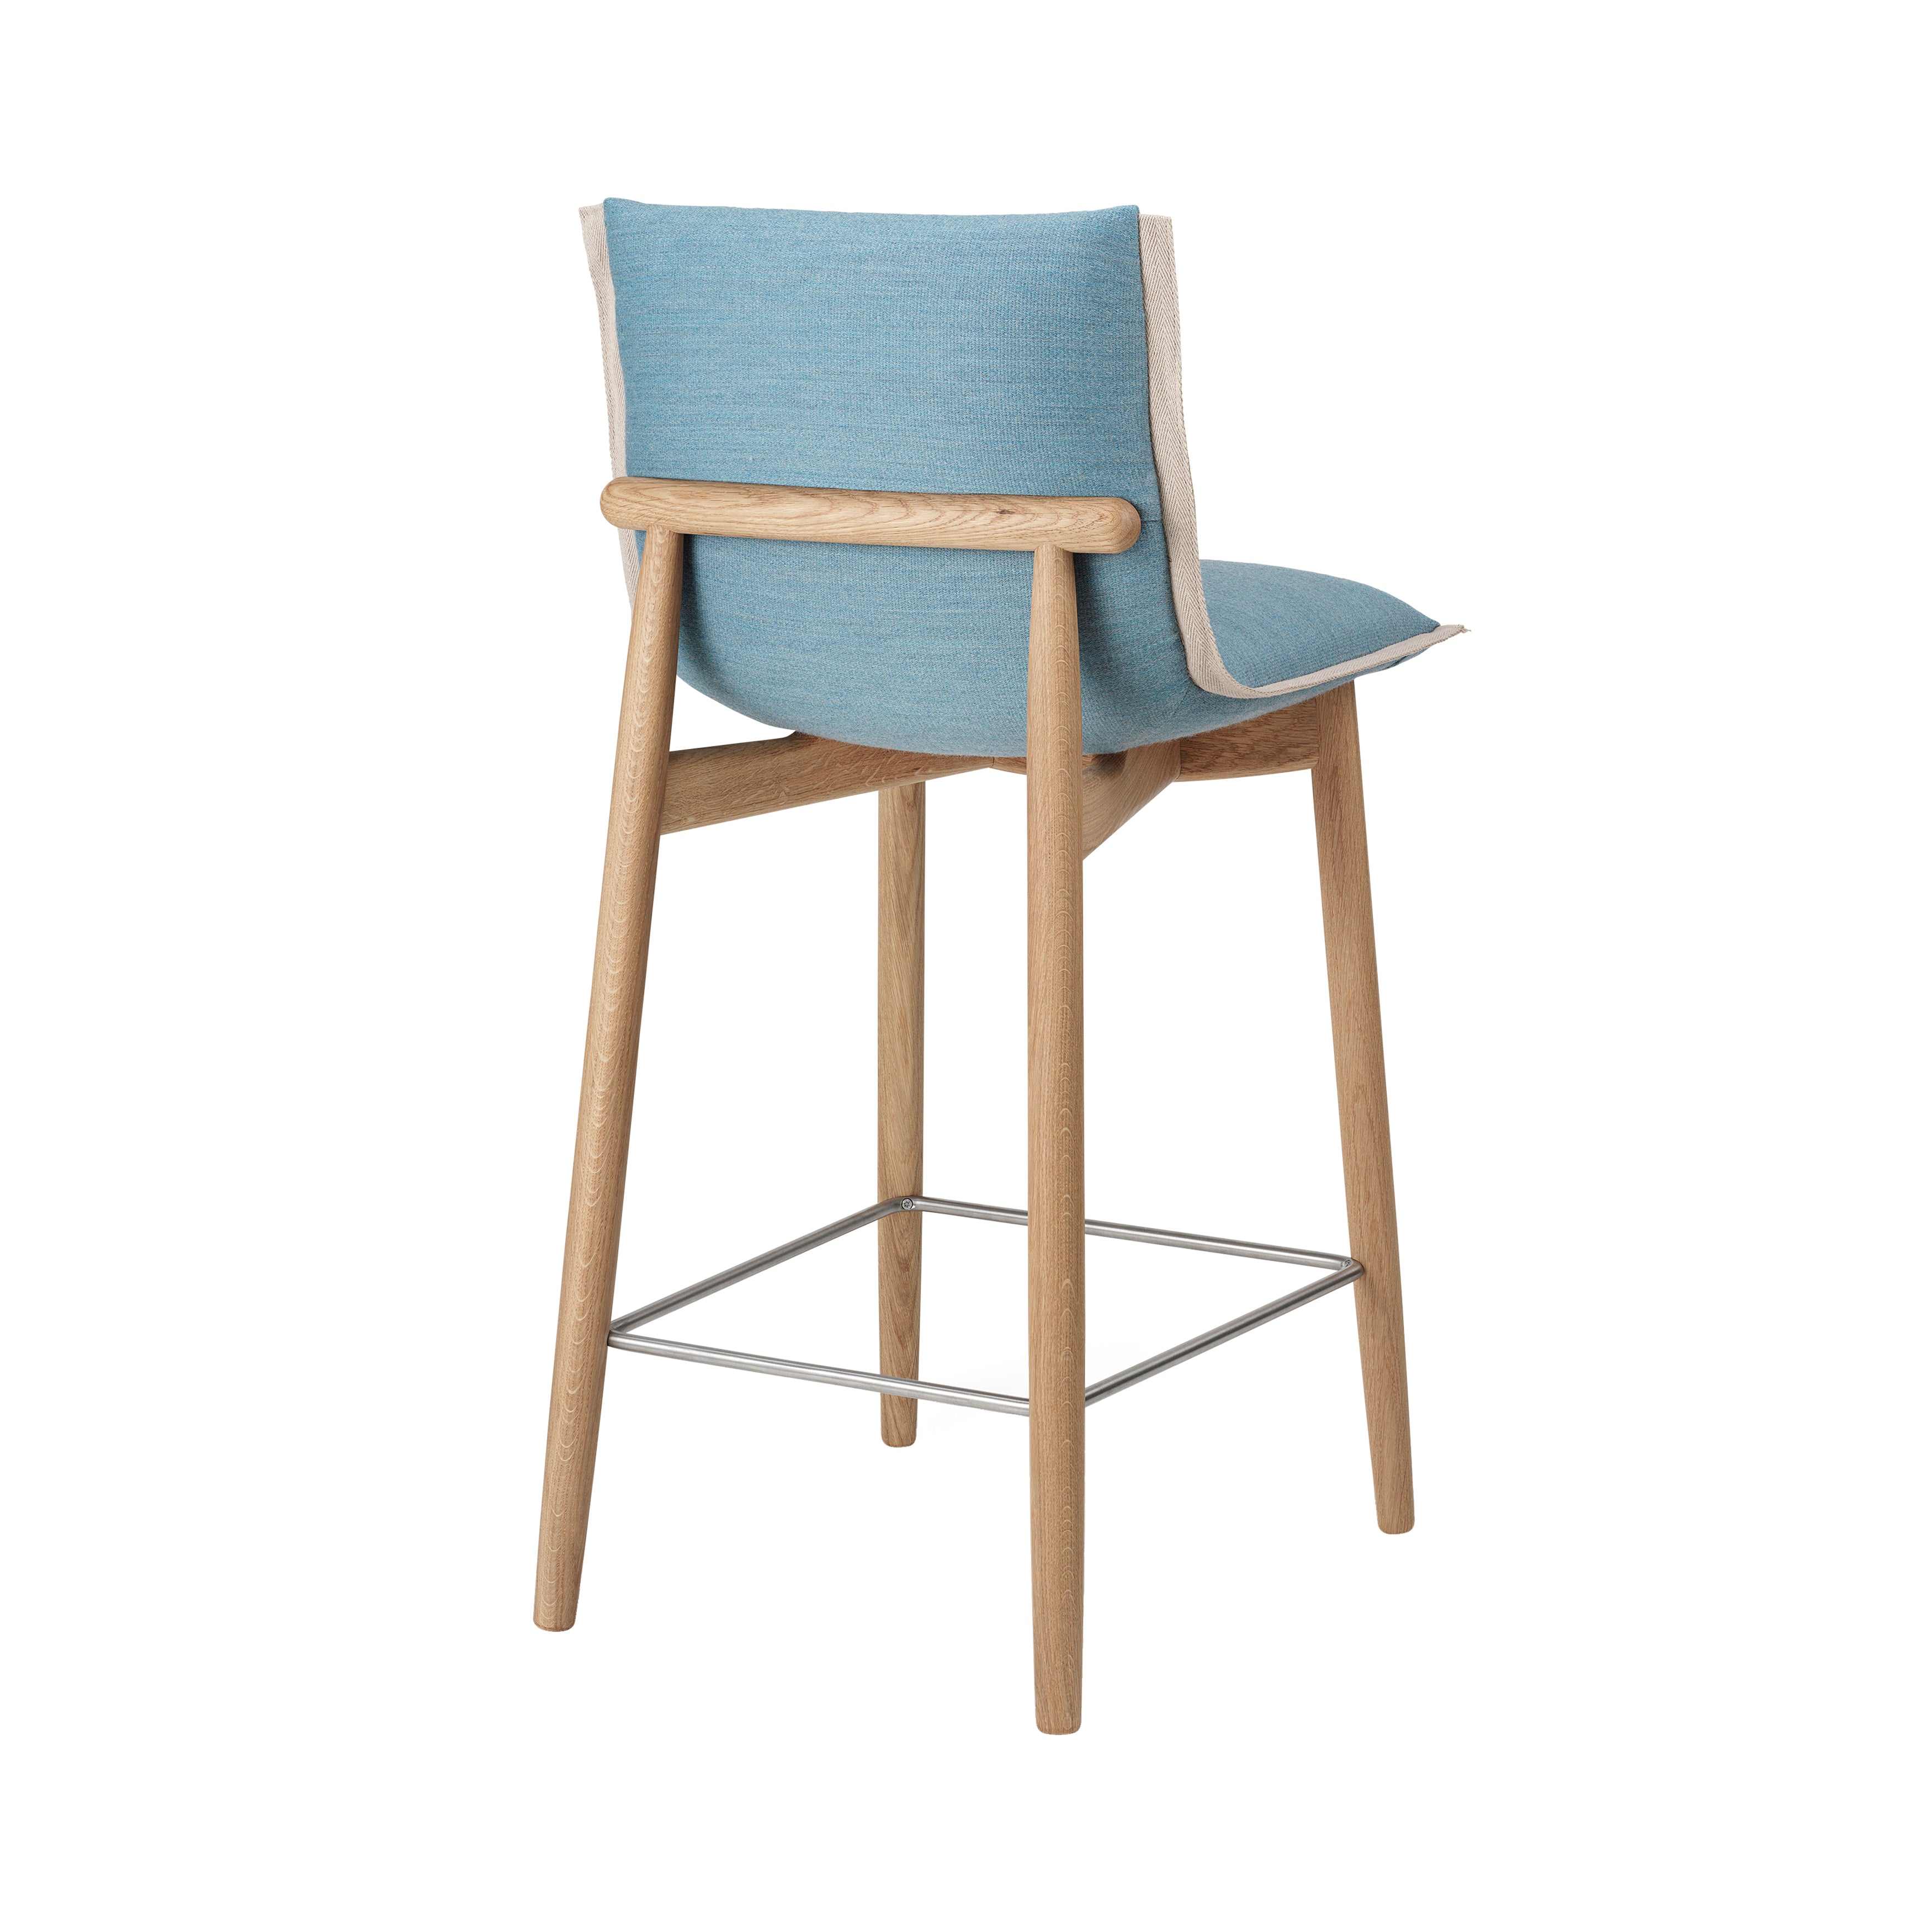 E007 Embrace Counter Stool: Stainless Steel + Natural Edging Strip + Oiled Oak